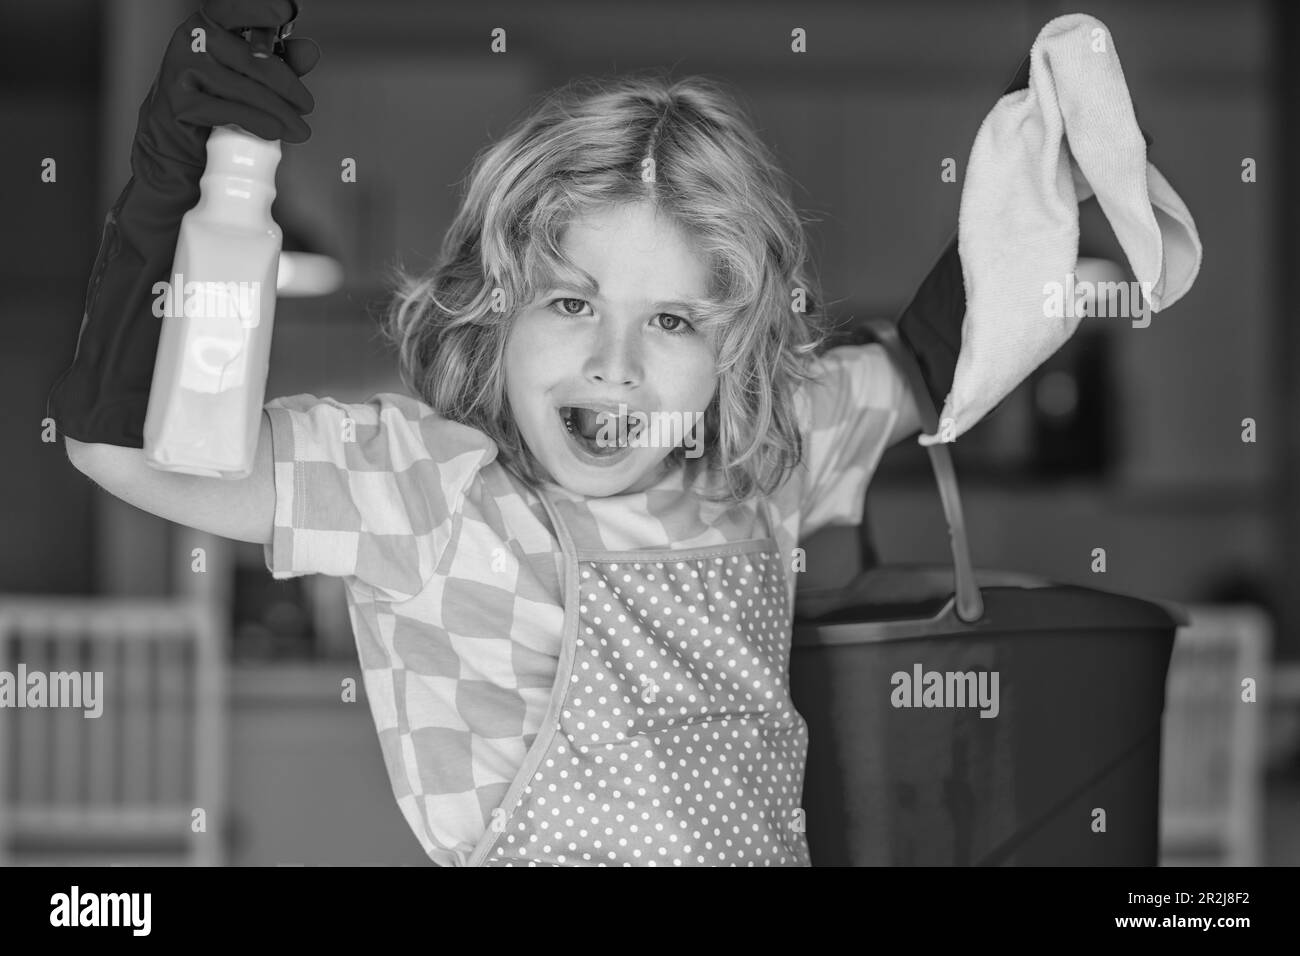 Portrait of child helping with housework, cleaning the house. Housekeeping, home chores Stock Photo